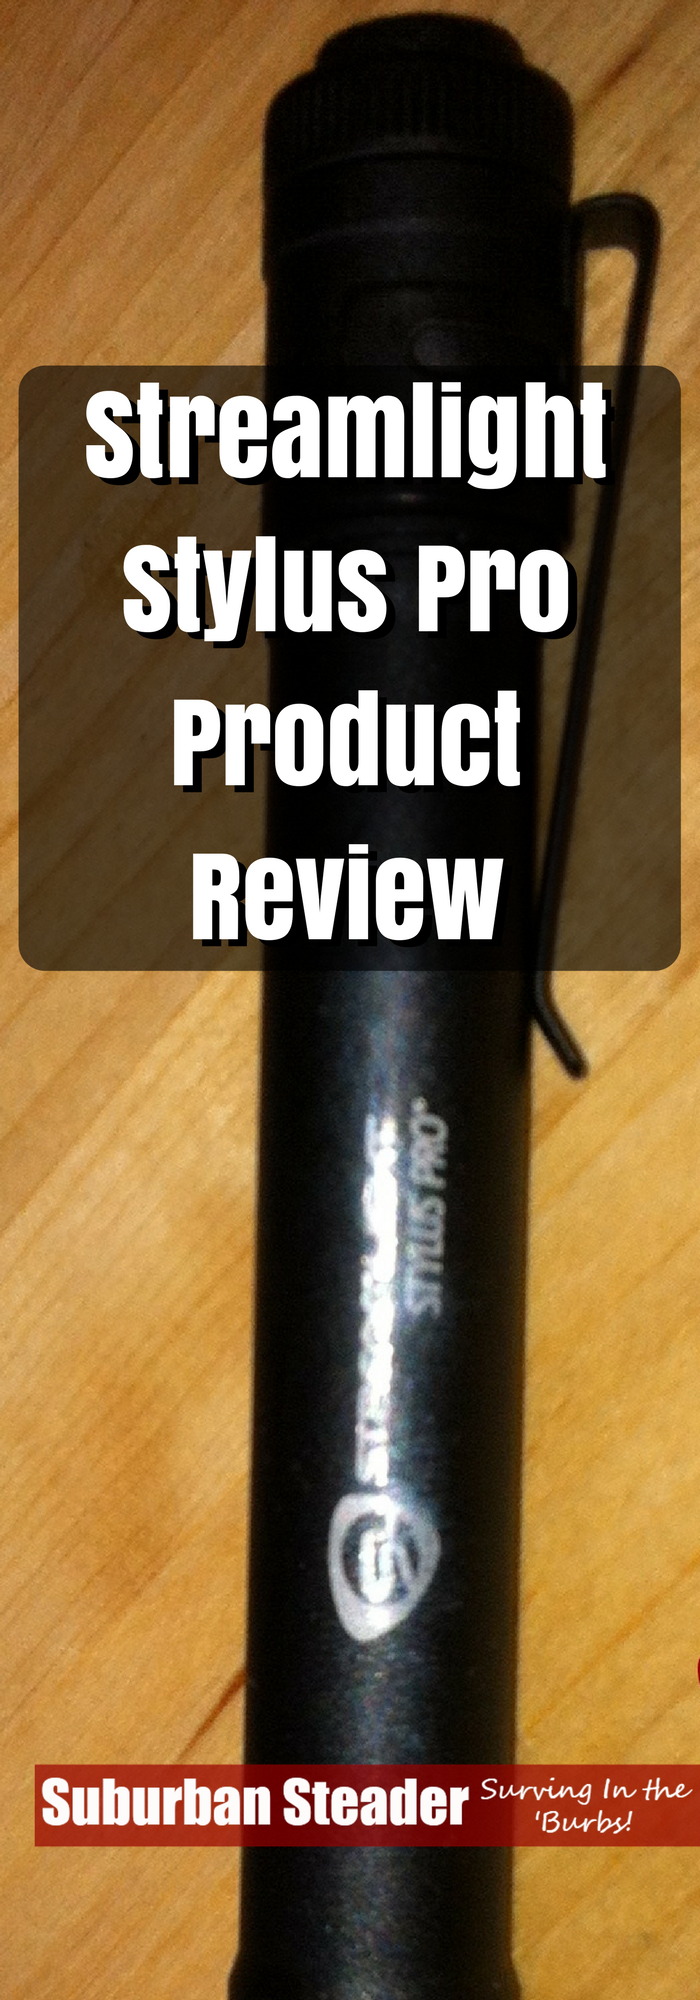 Streamlight Stylus Pro Product Review